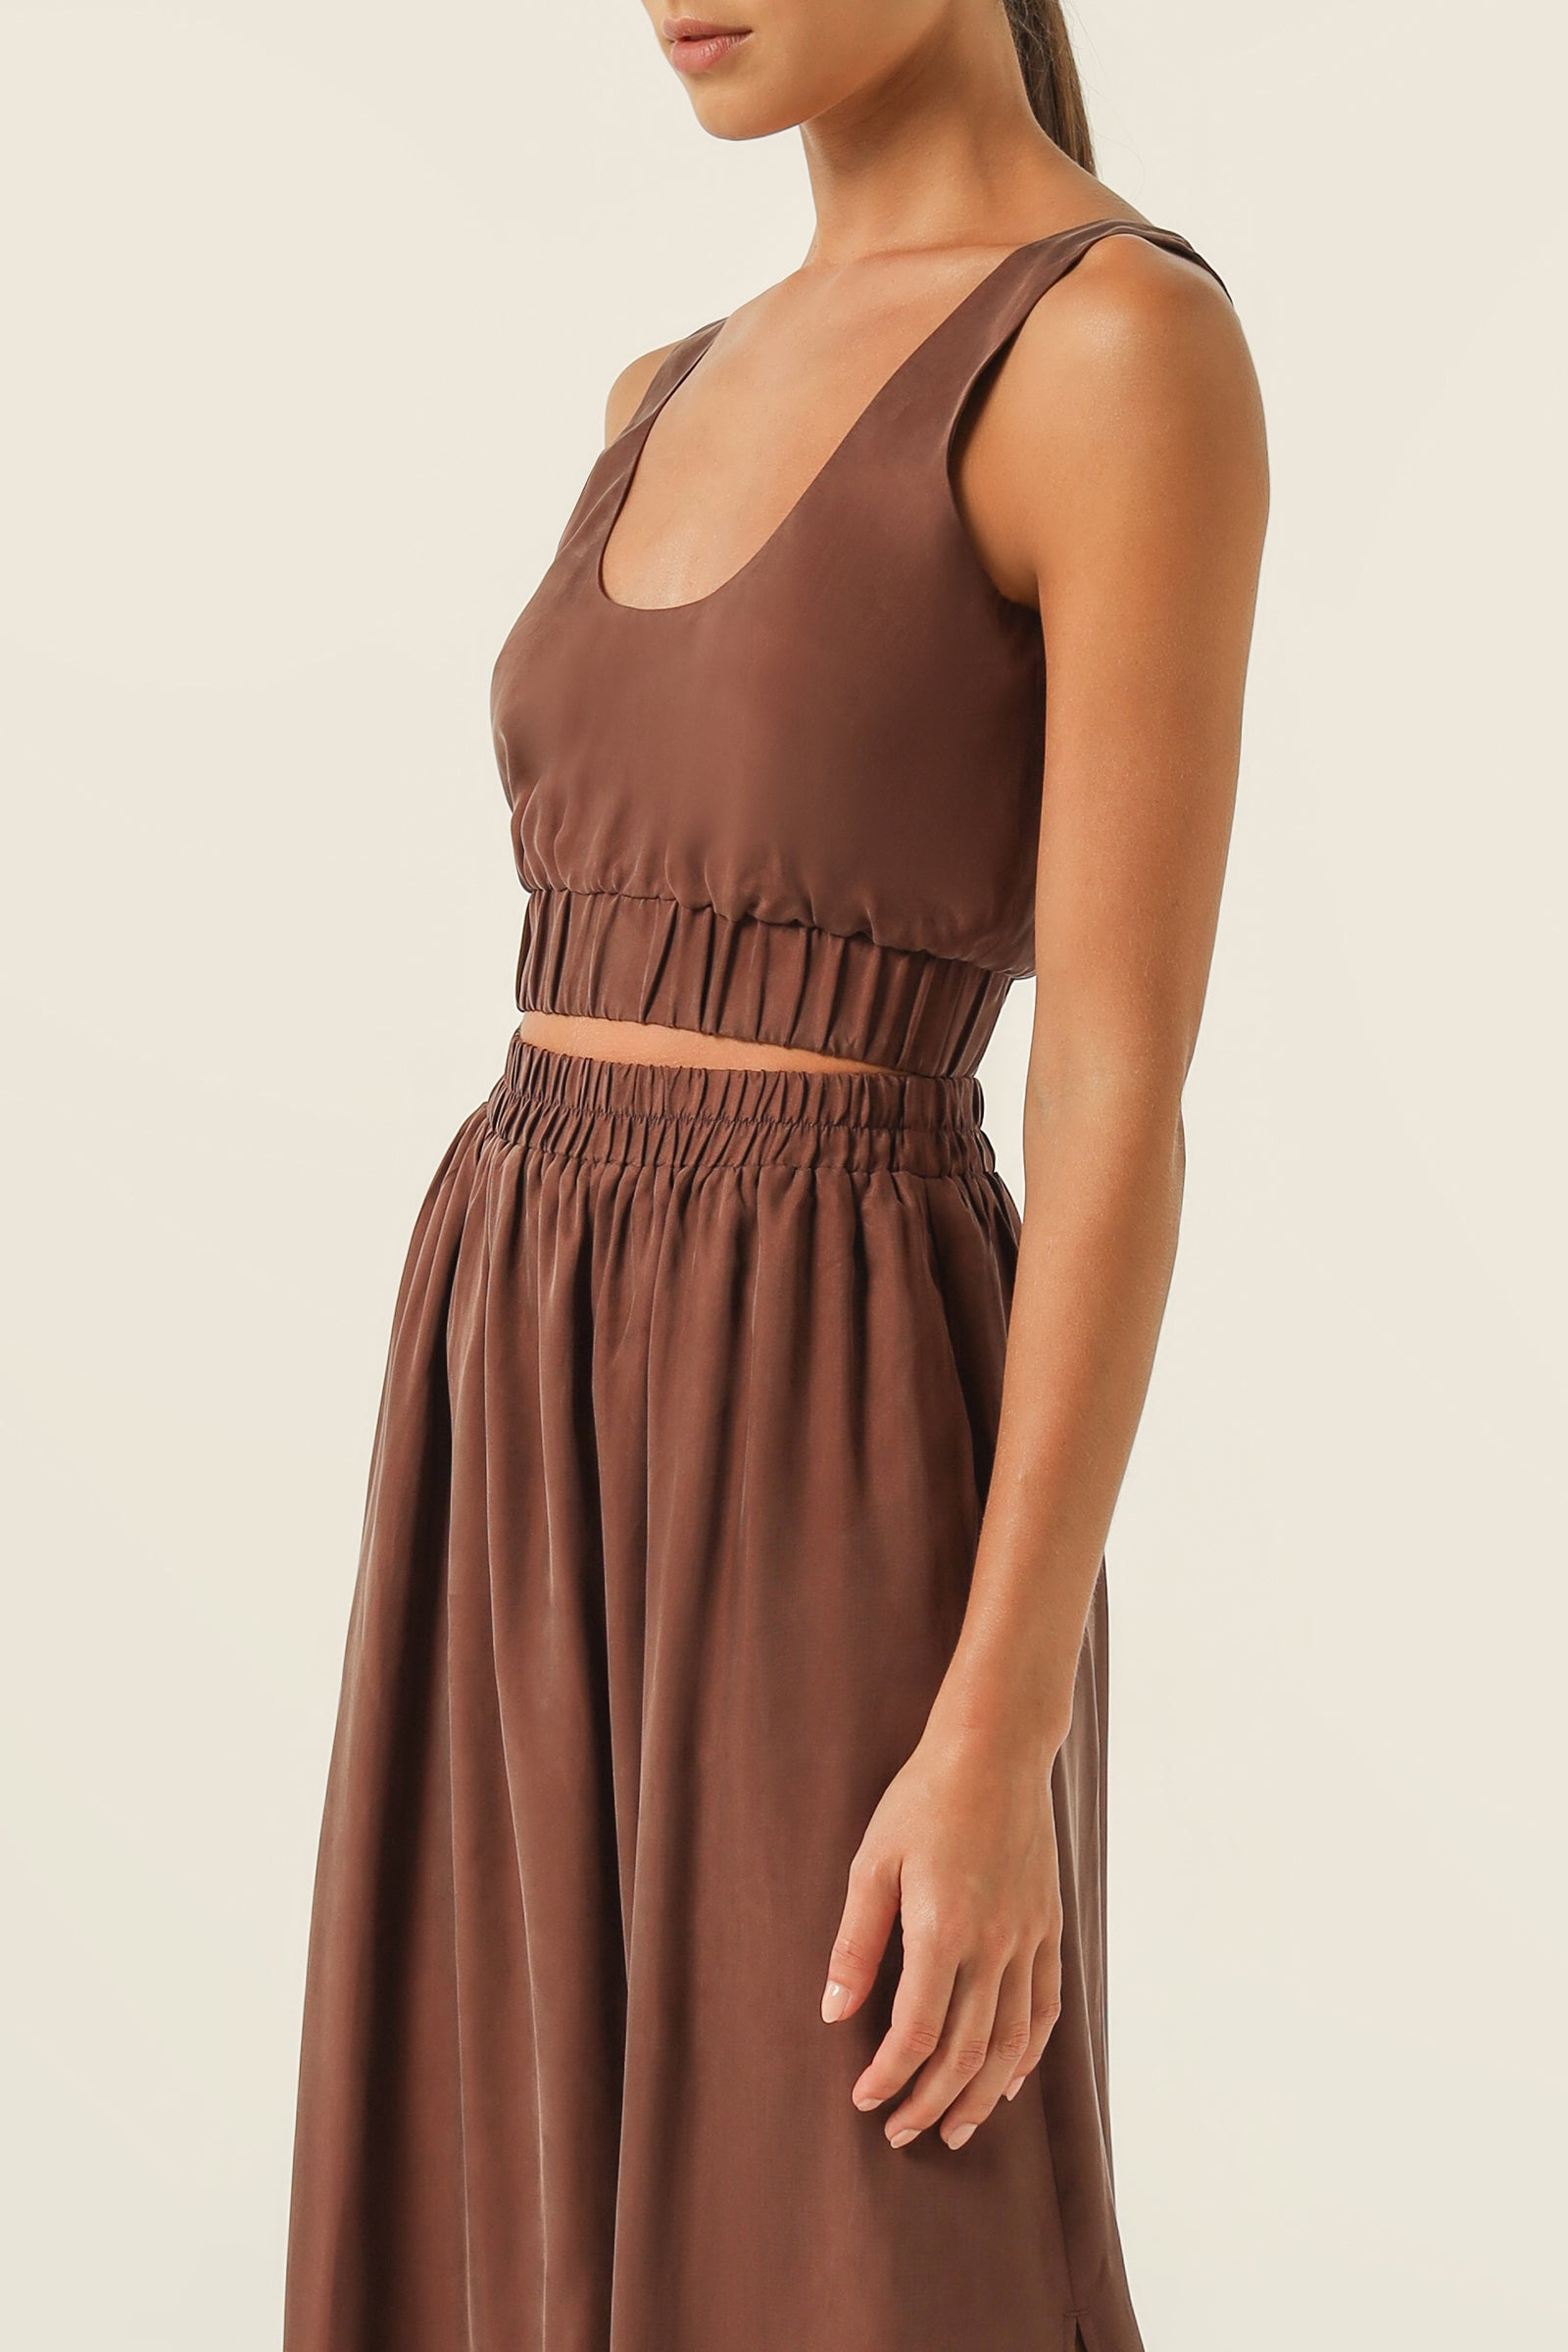 Nude Lucy Gia Cupro Crop Top In a Brown Clove Colour